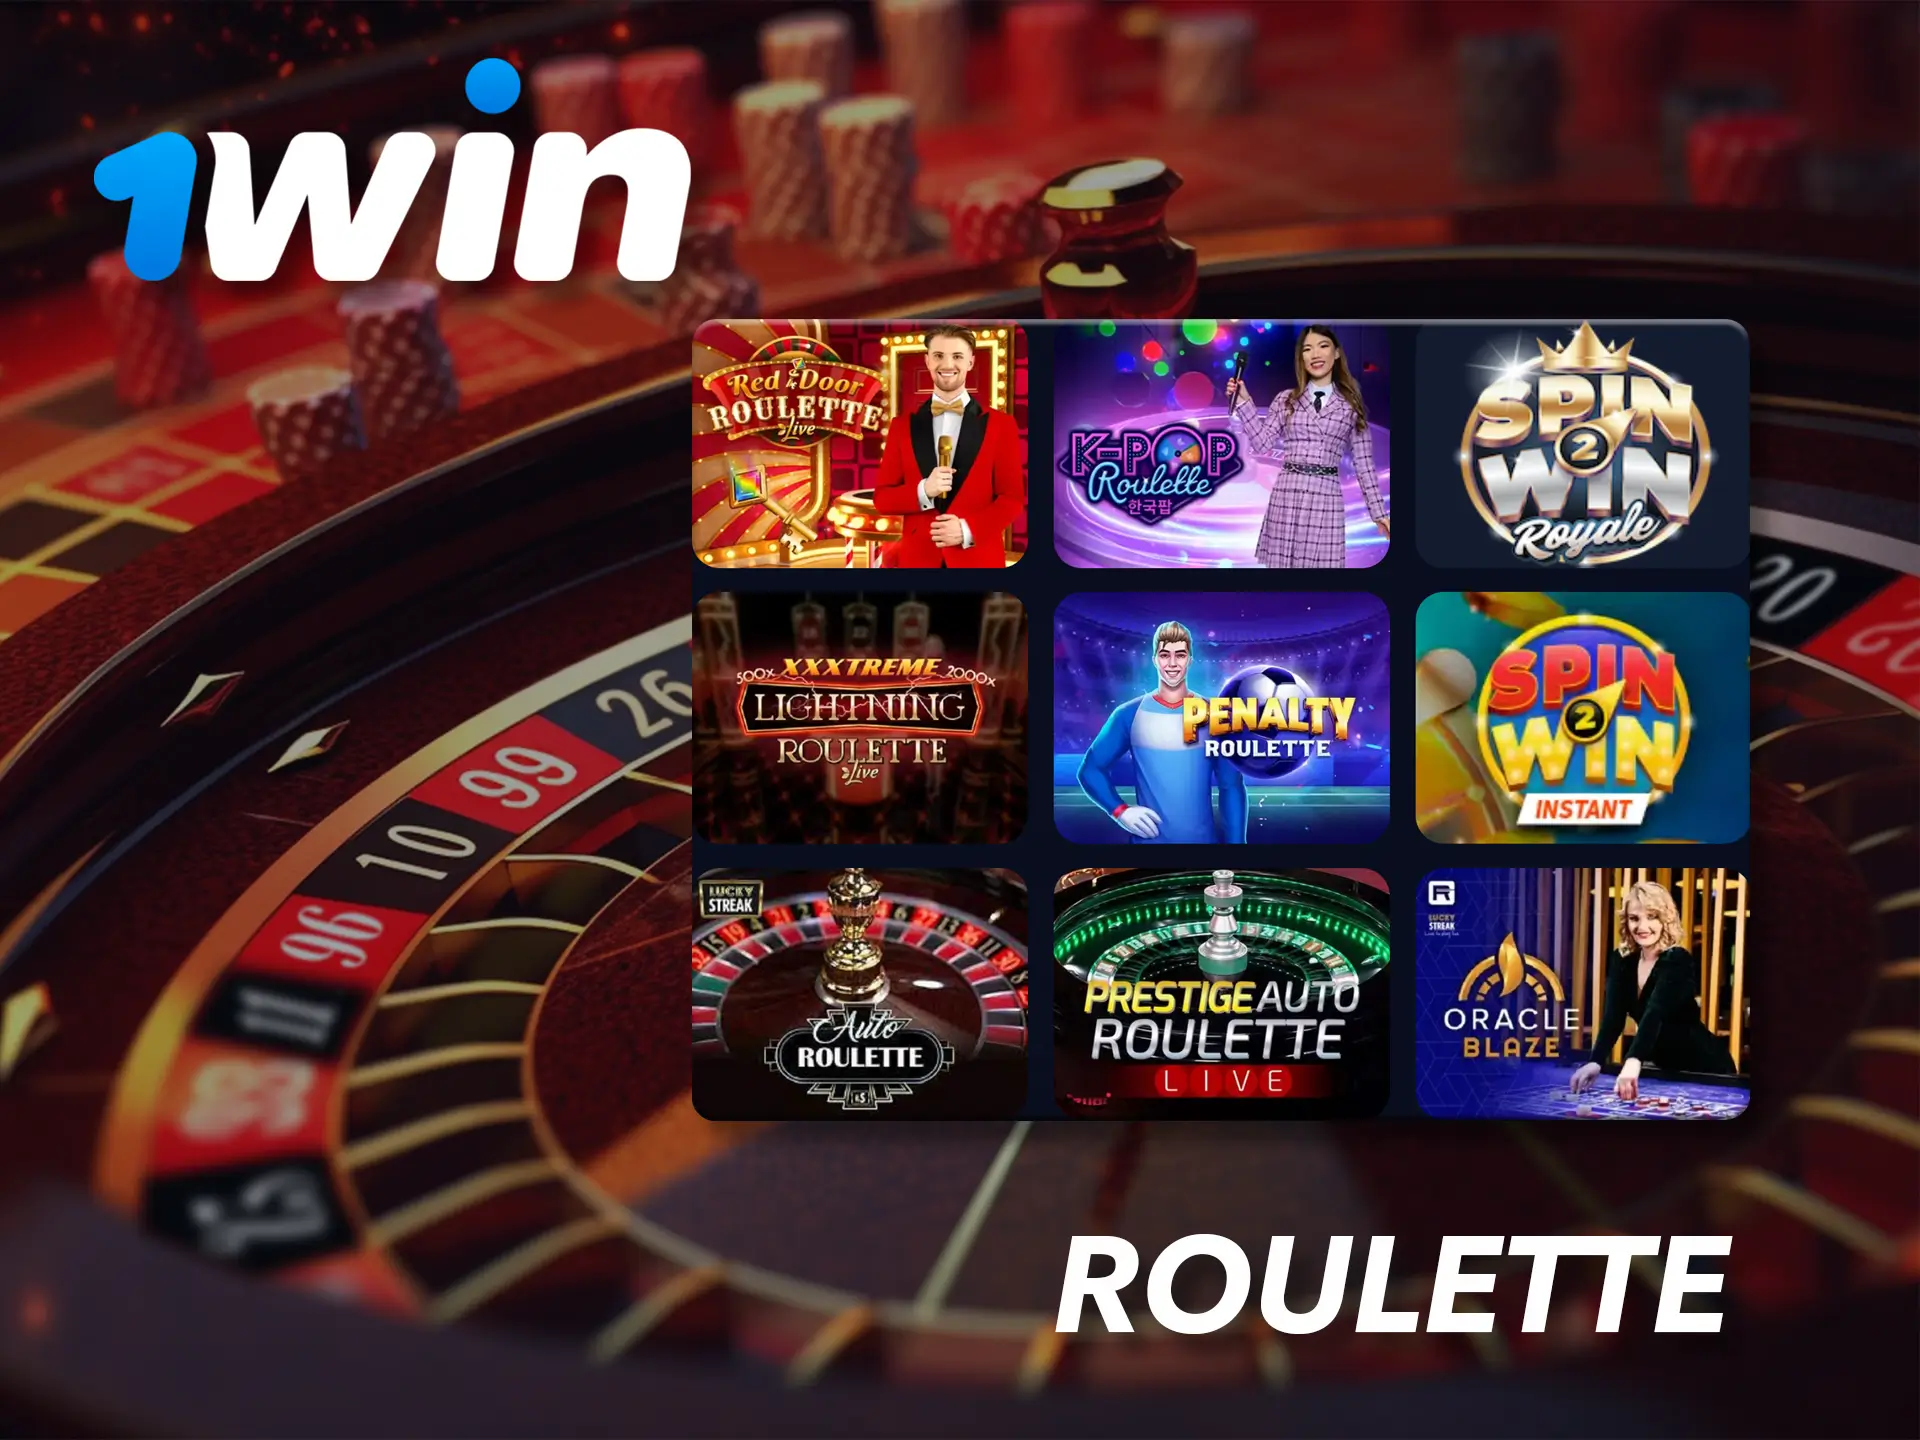 Use your wits when playing roulette from 1Win.